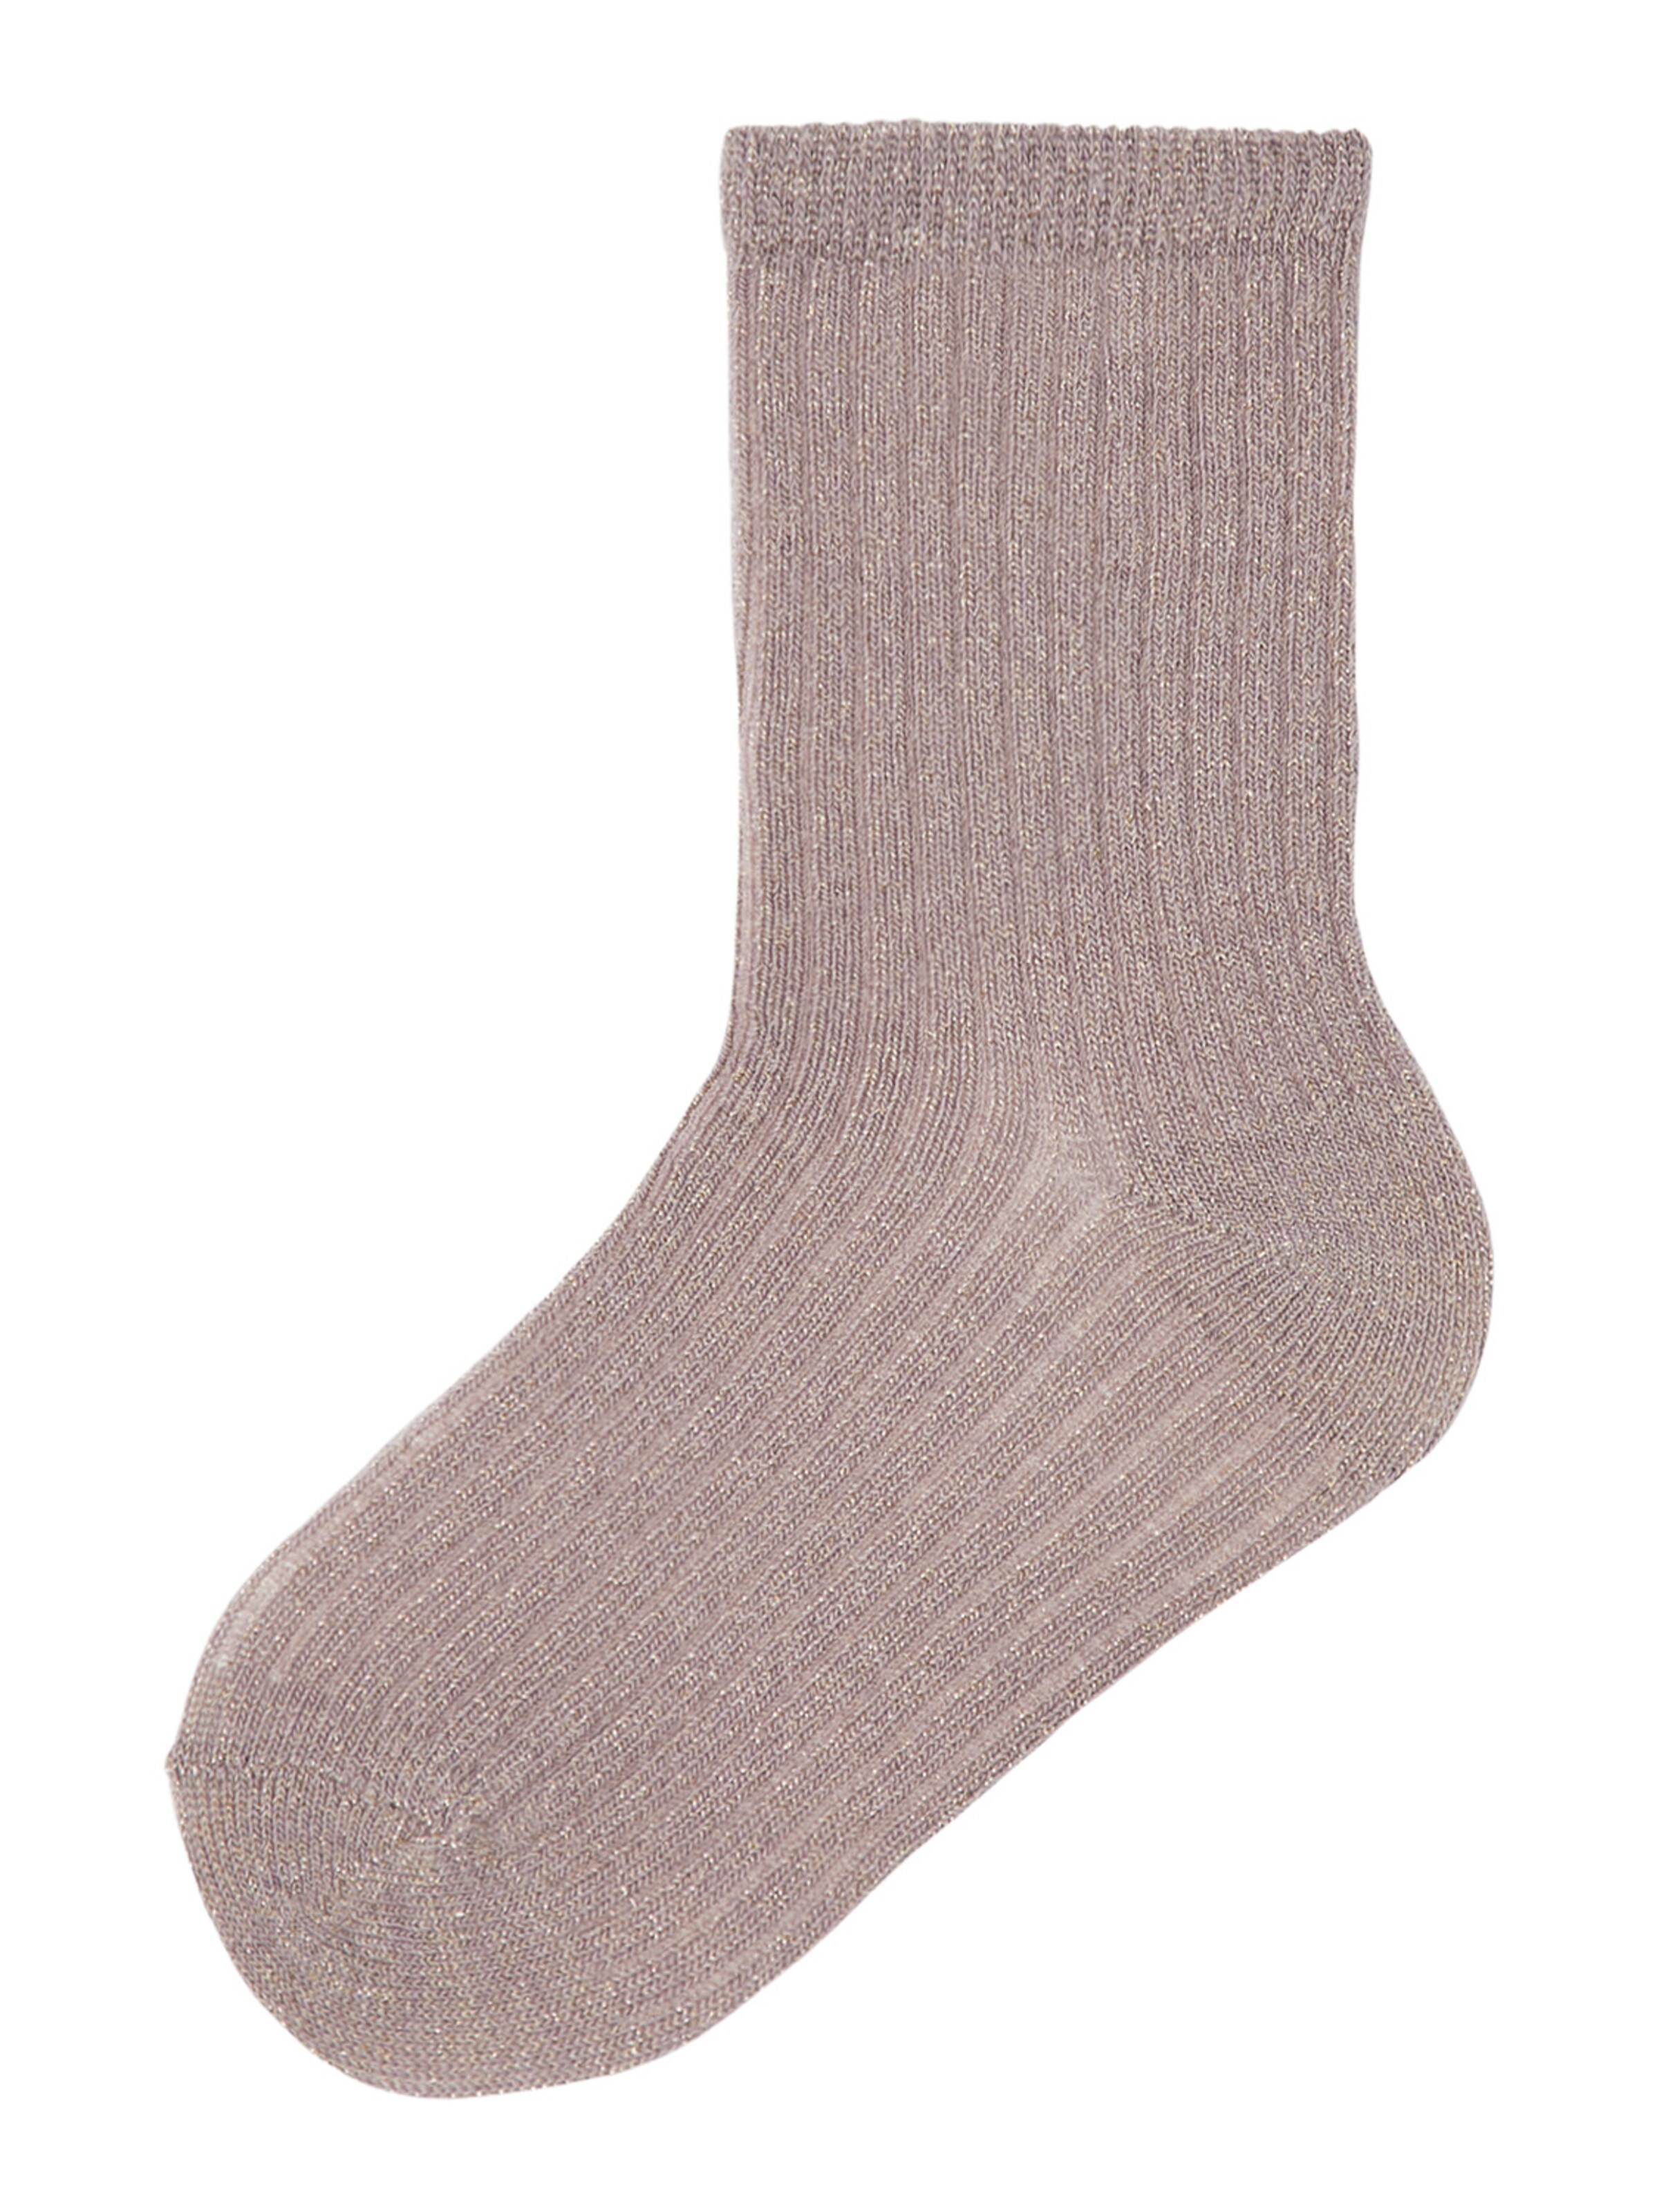 Name It Chaussettes 'huxely' 19-21 Beige